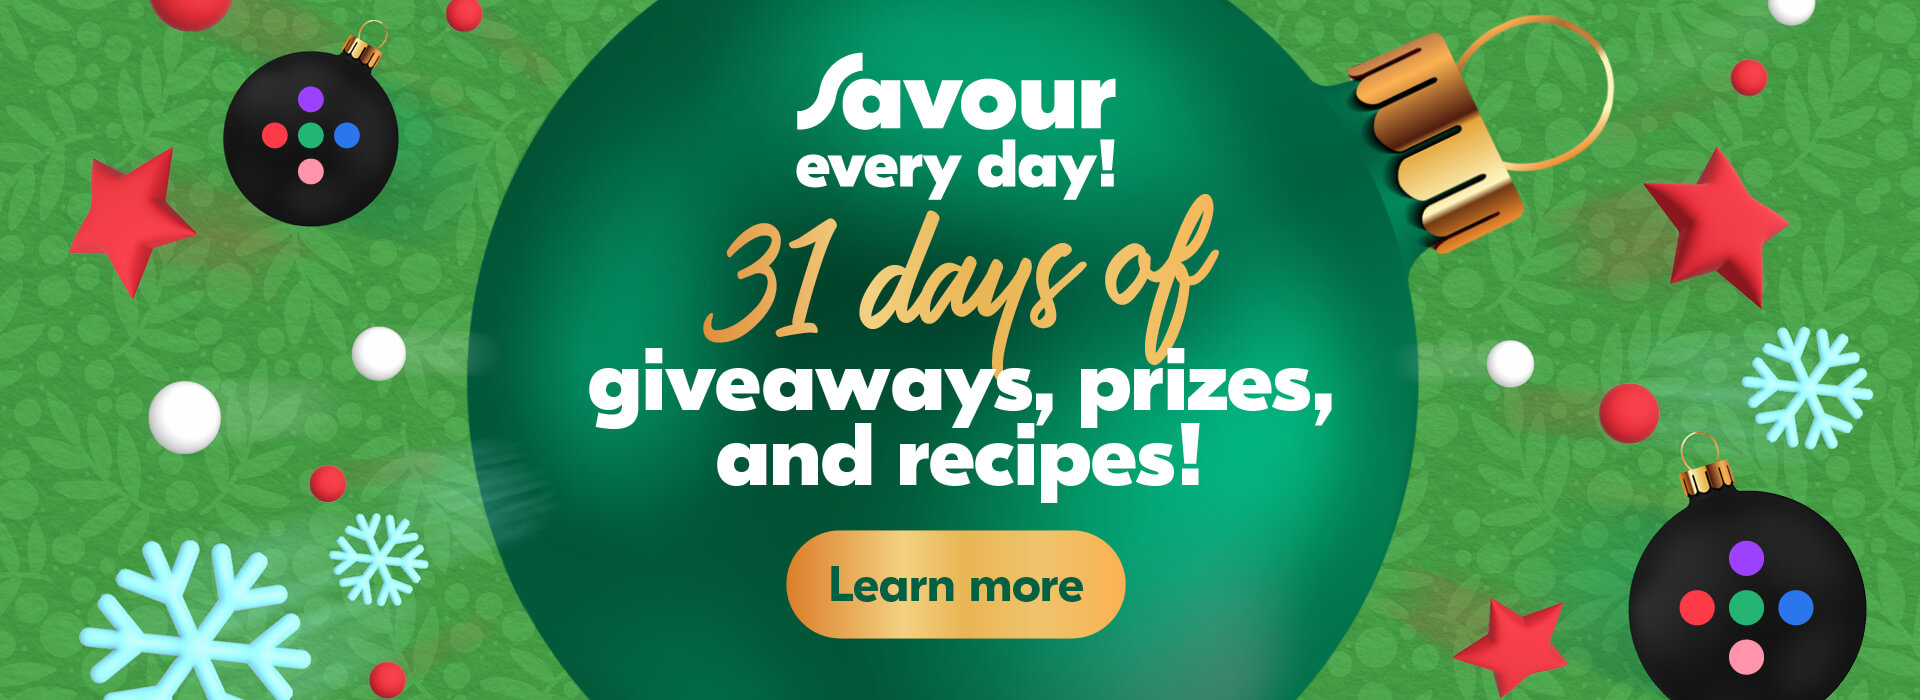 Text Reading â€˜Savour every day! 31 days of giveaways, prizes and recipes! â€˜Learn more by clicking the button below.'